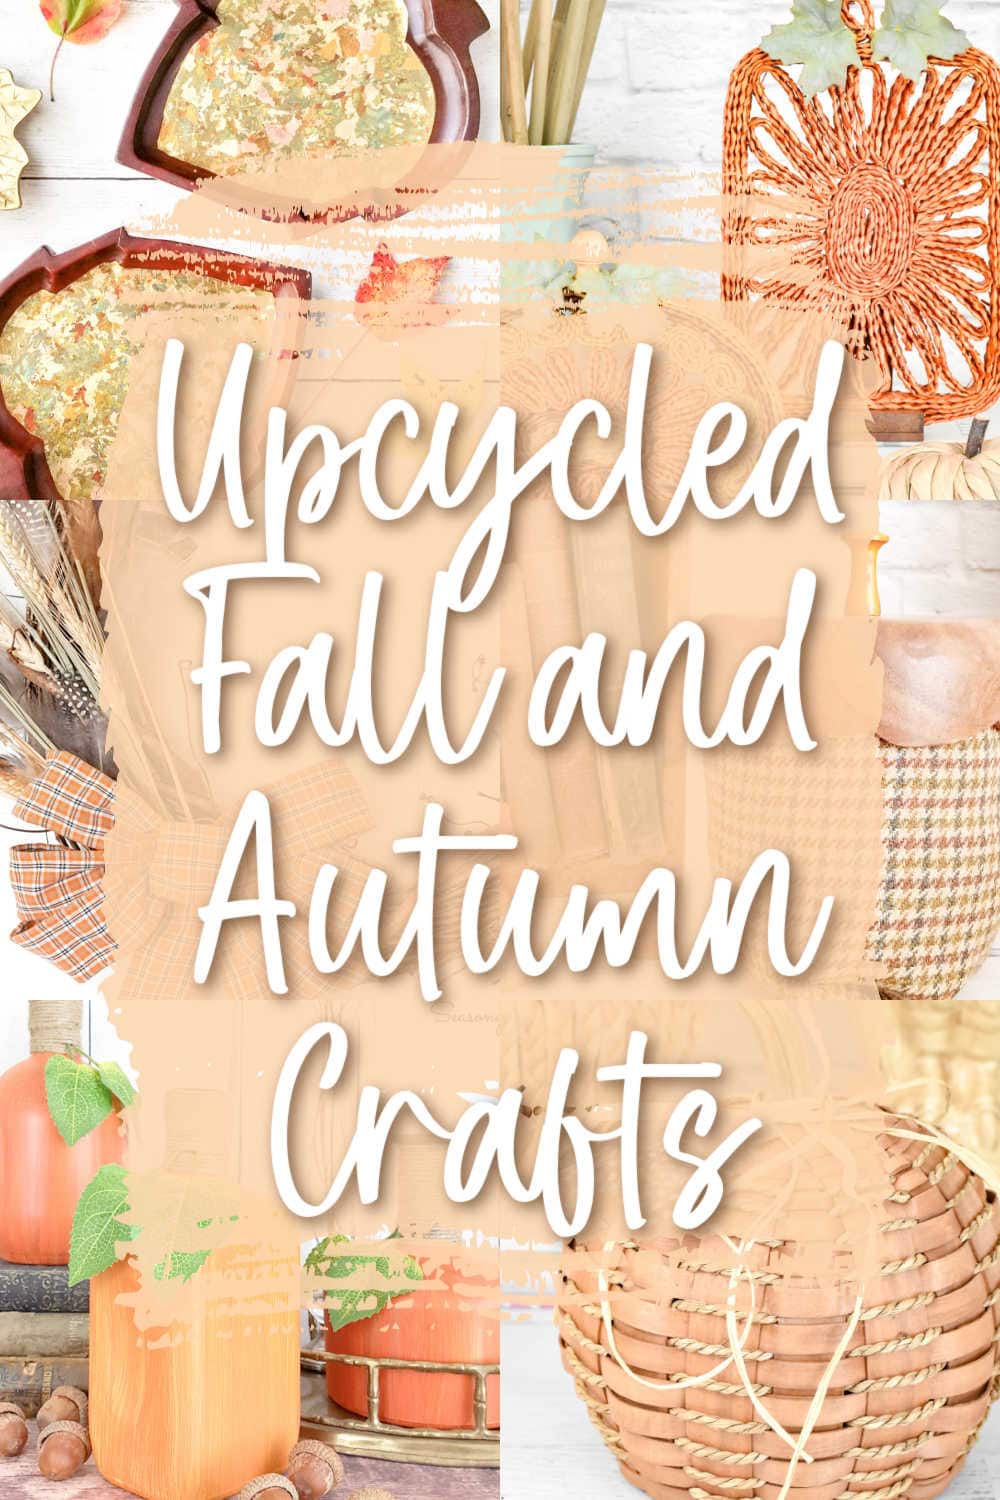 upcycled fall crafts from thrift store finds